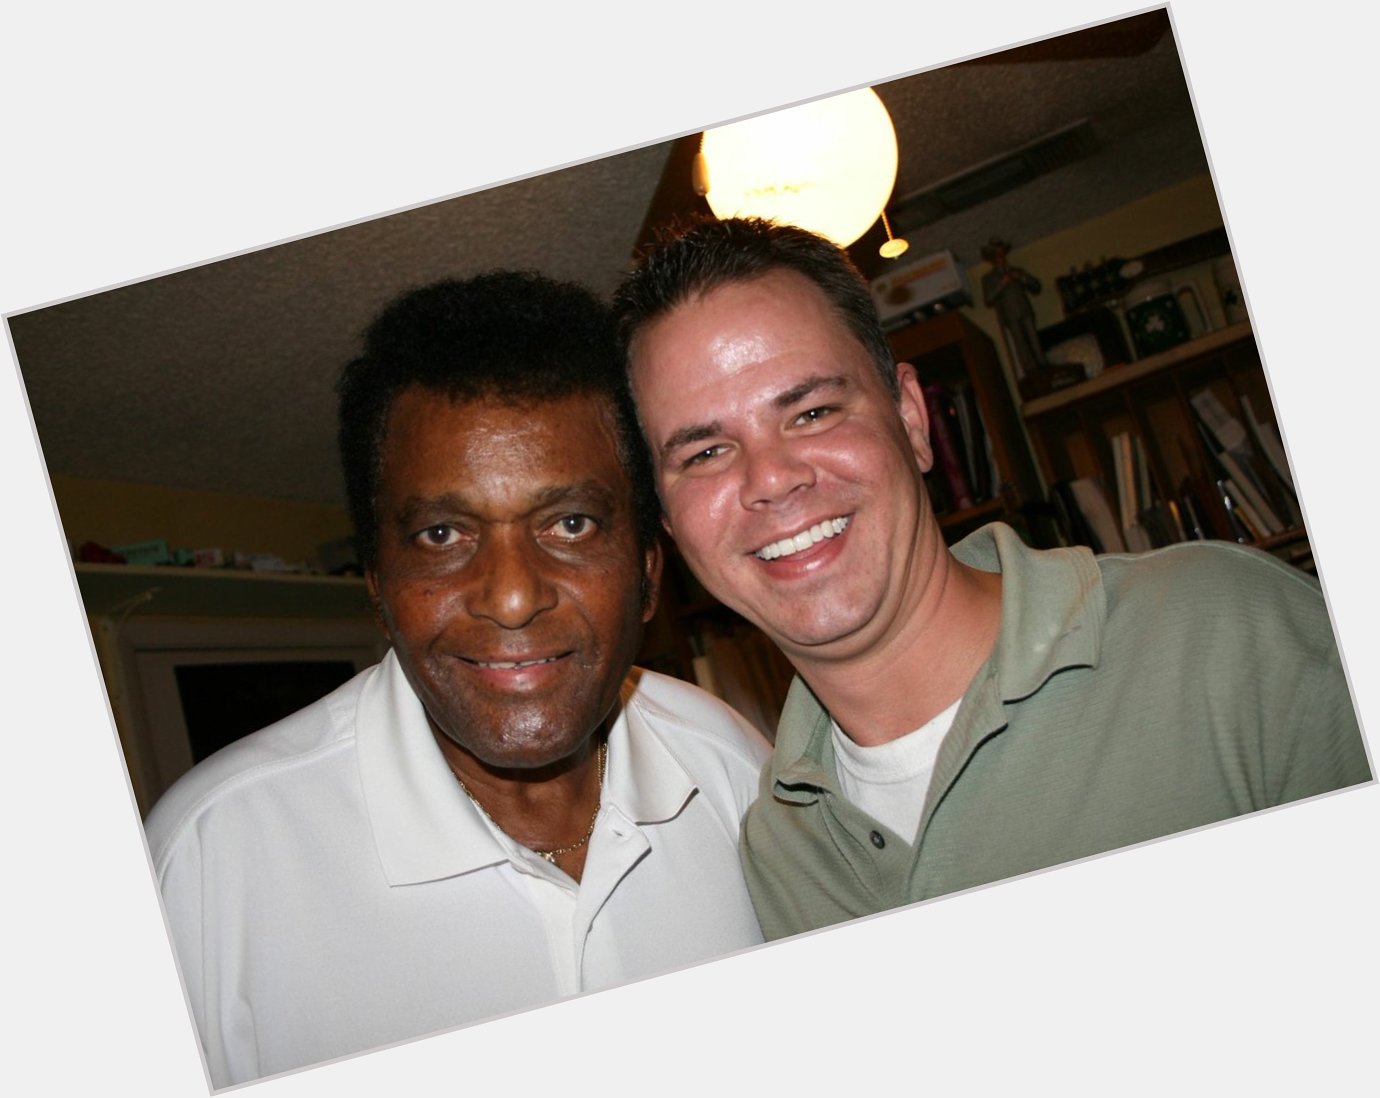 Happy Birthday to Charley Pride. A class act on and off the stage.  